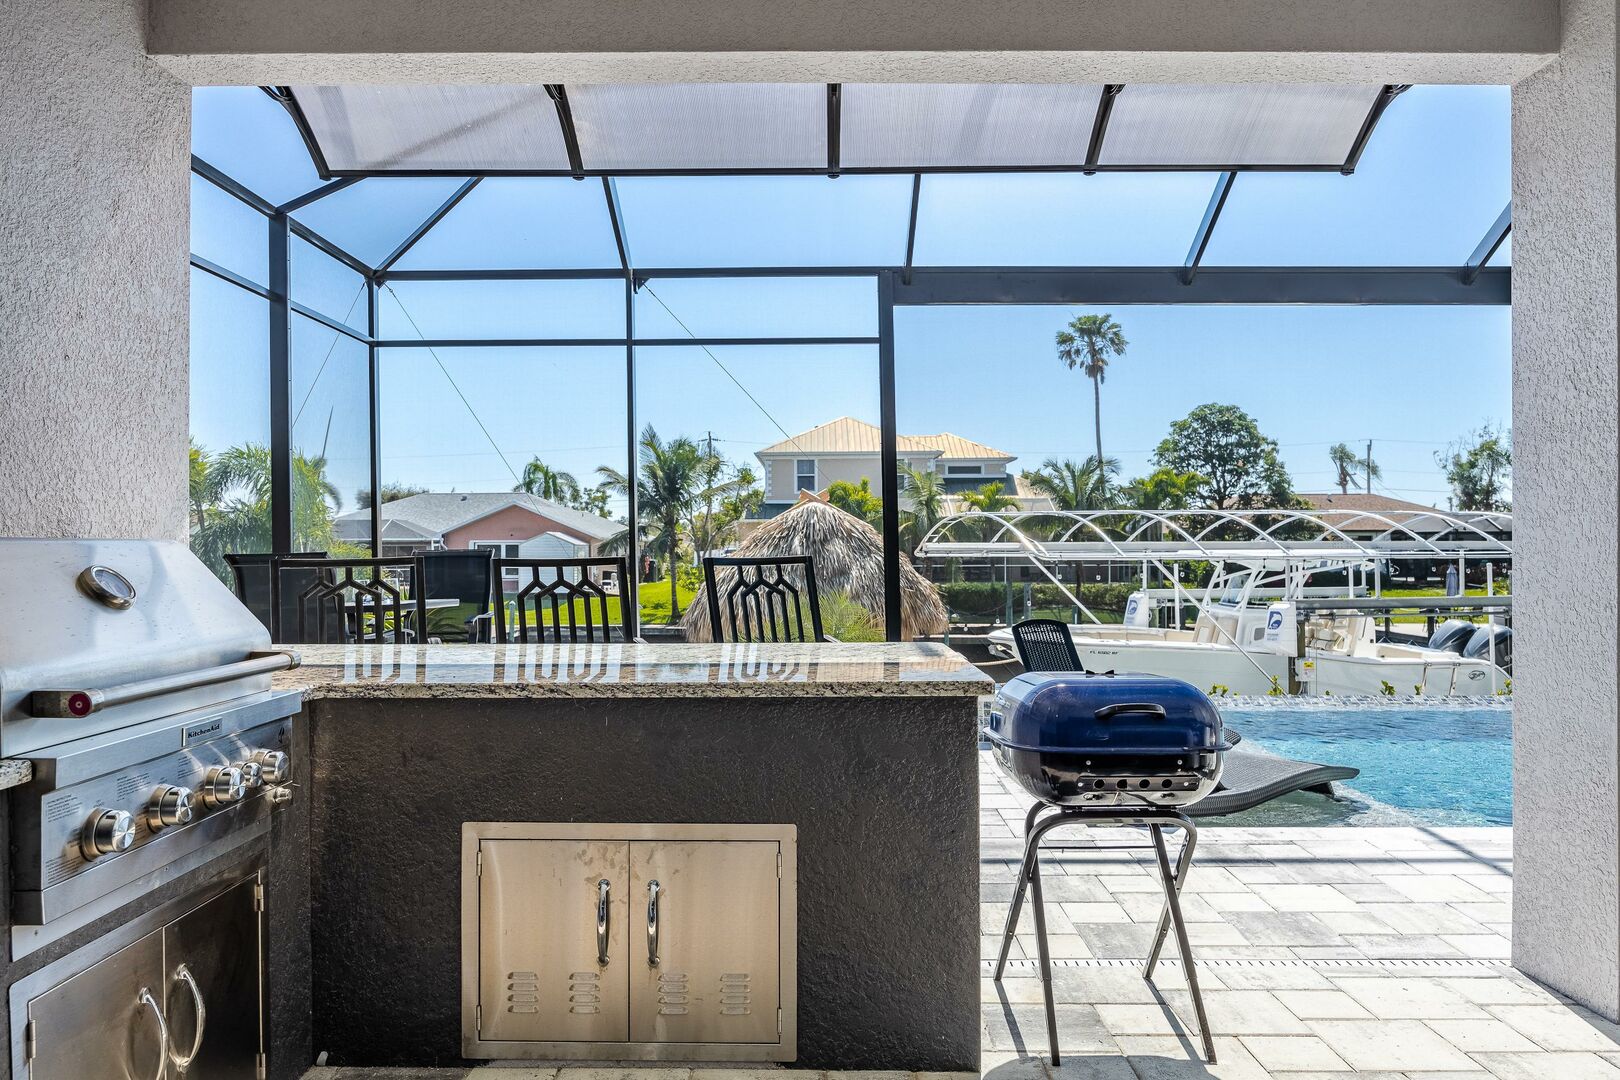 Outdoor kitchen at Vacation Rental in Cape Coral, Florida